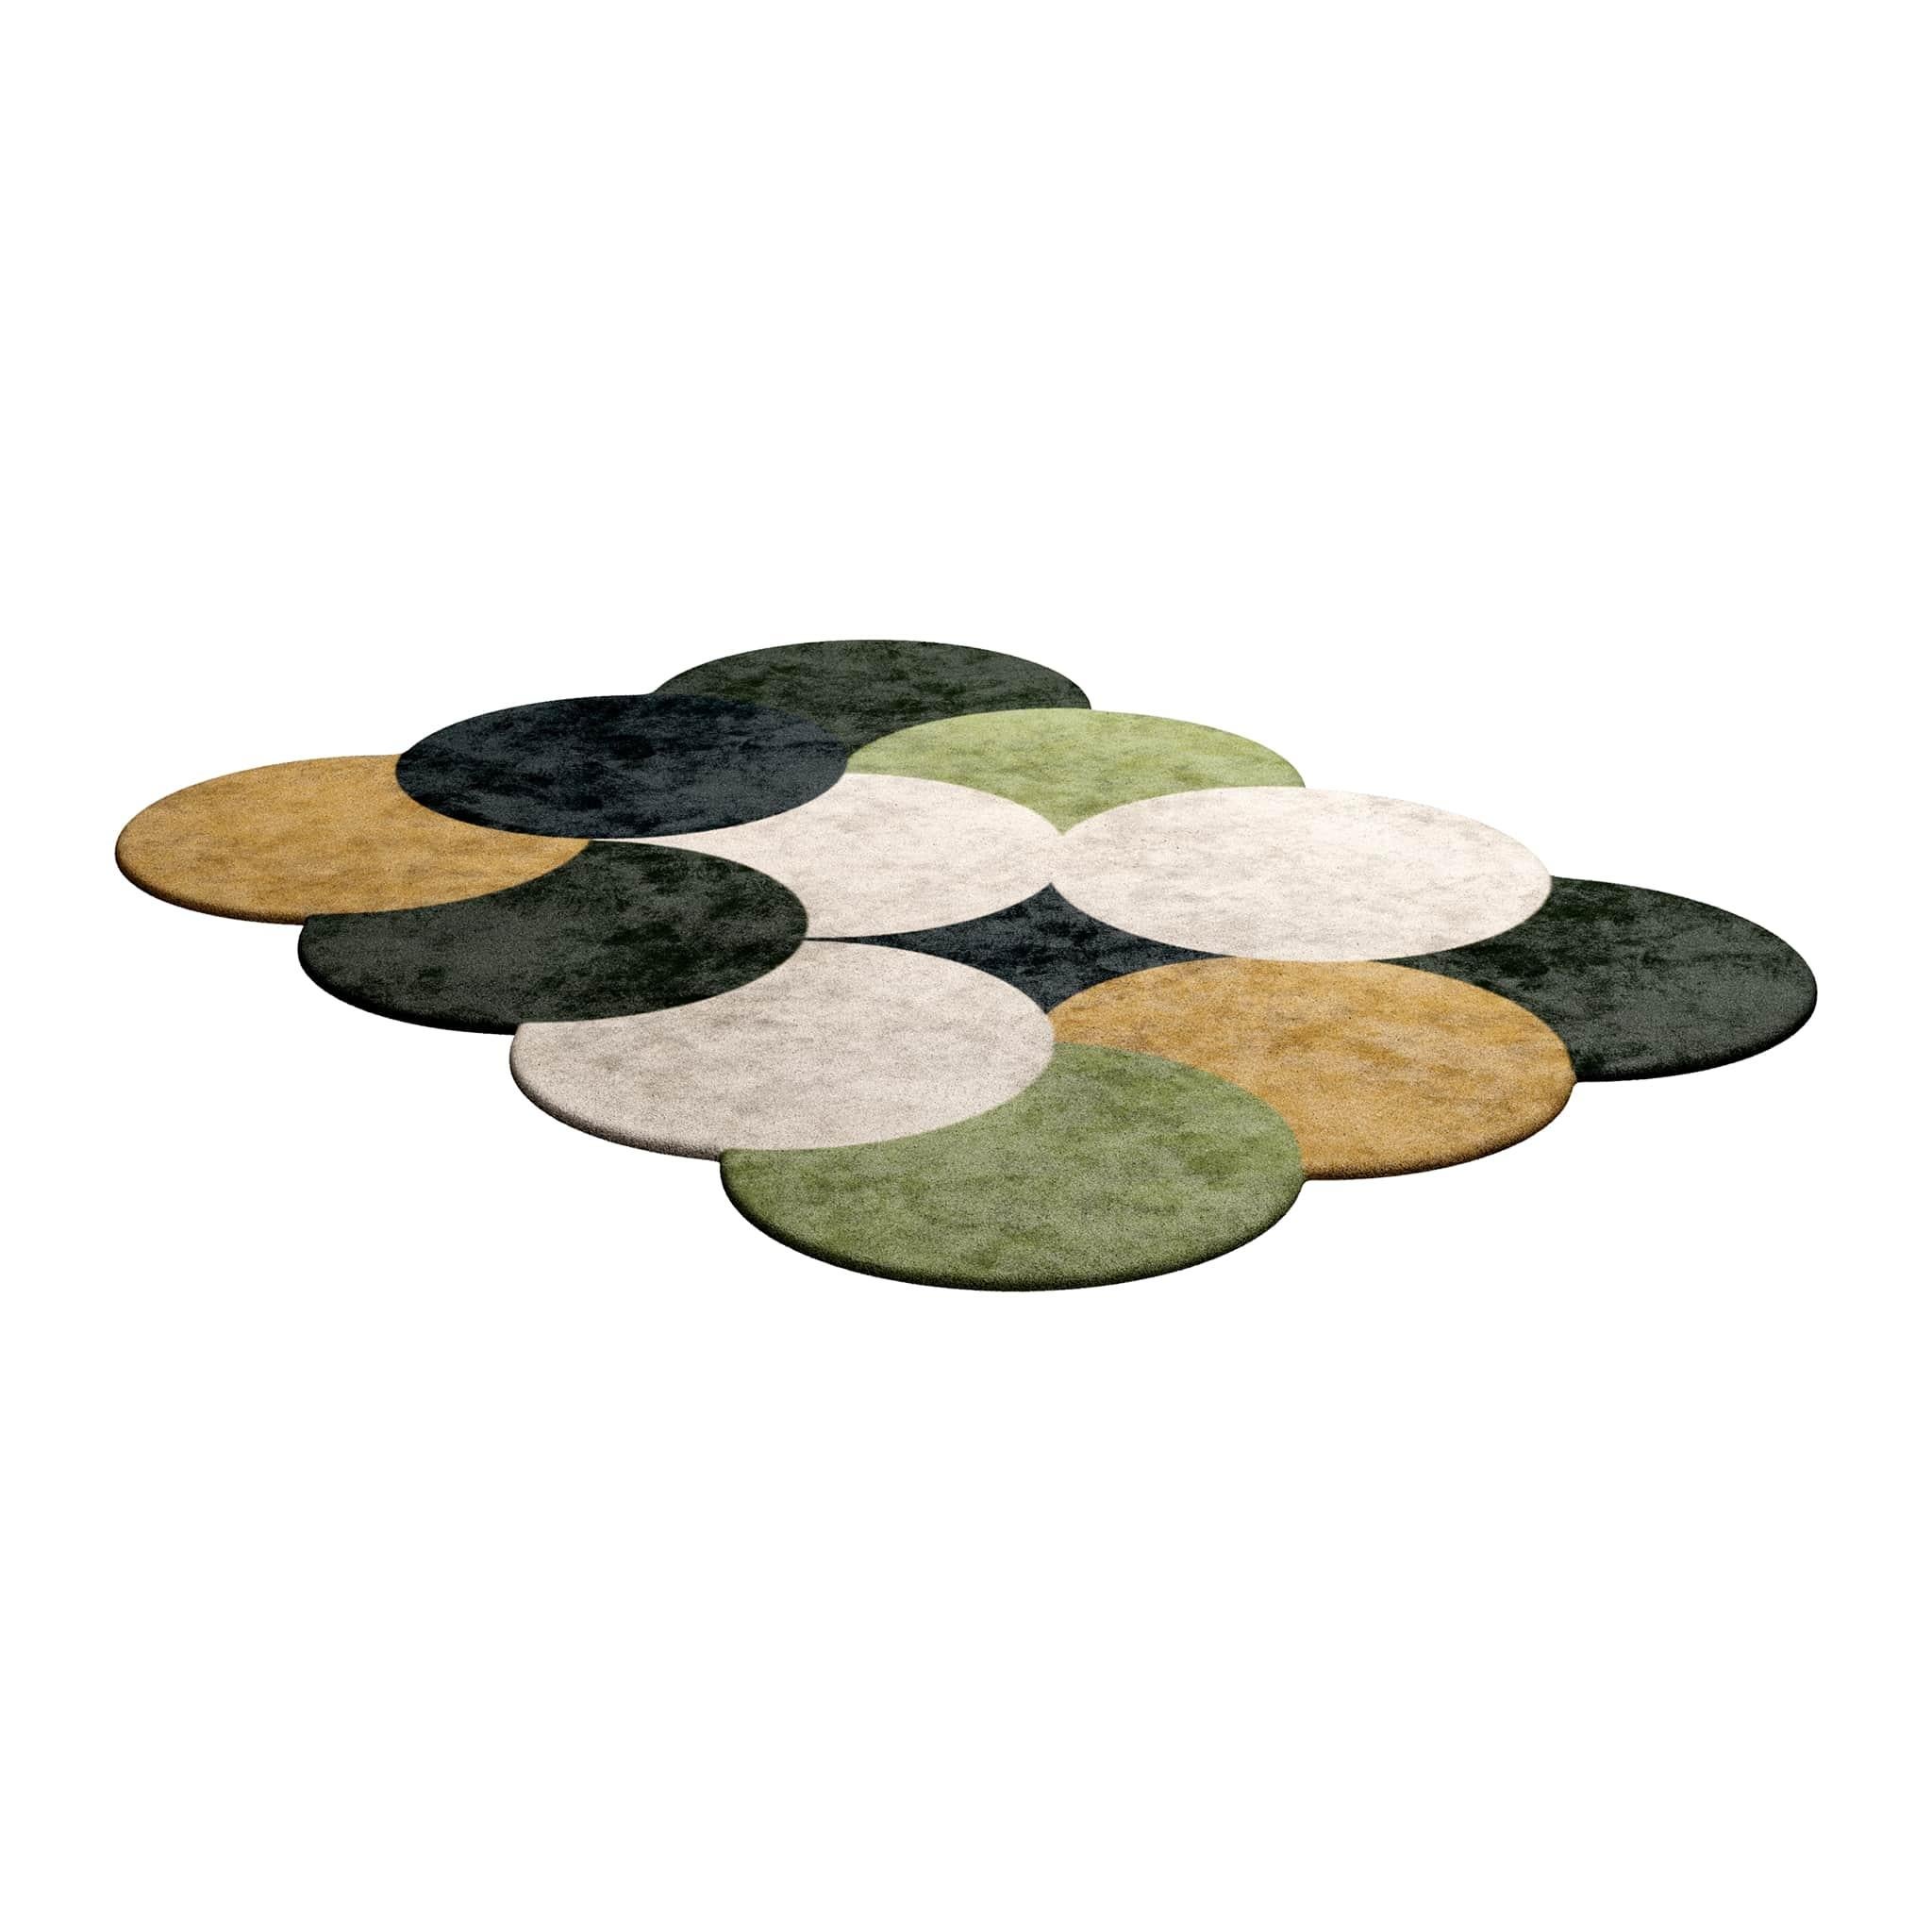 TAPIS Shaped #014 is an eclectic rug that brings back mid-century modern vibes mixed with Postmodern style. This rug is handmade using the hand-tufted technique from 100% botanical silk with a thickness of 16mm. Available in sizes Small and Large.